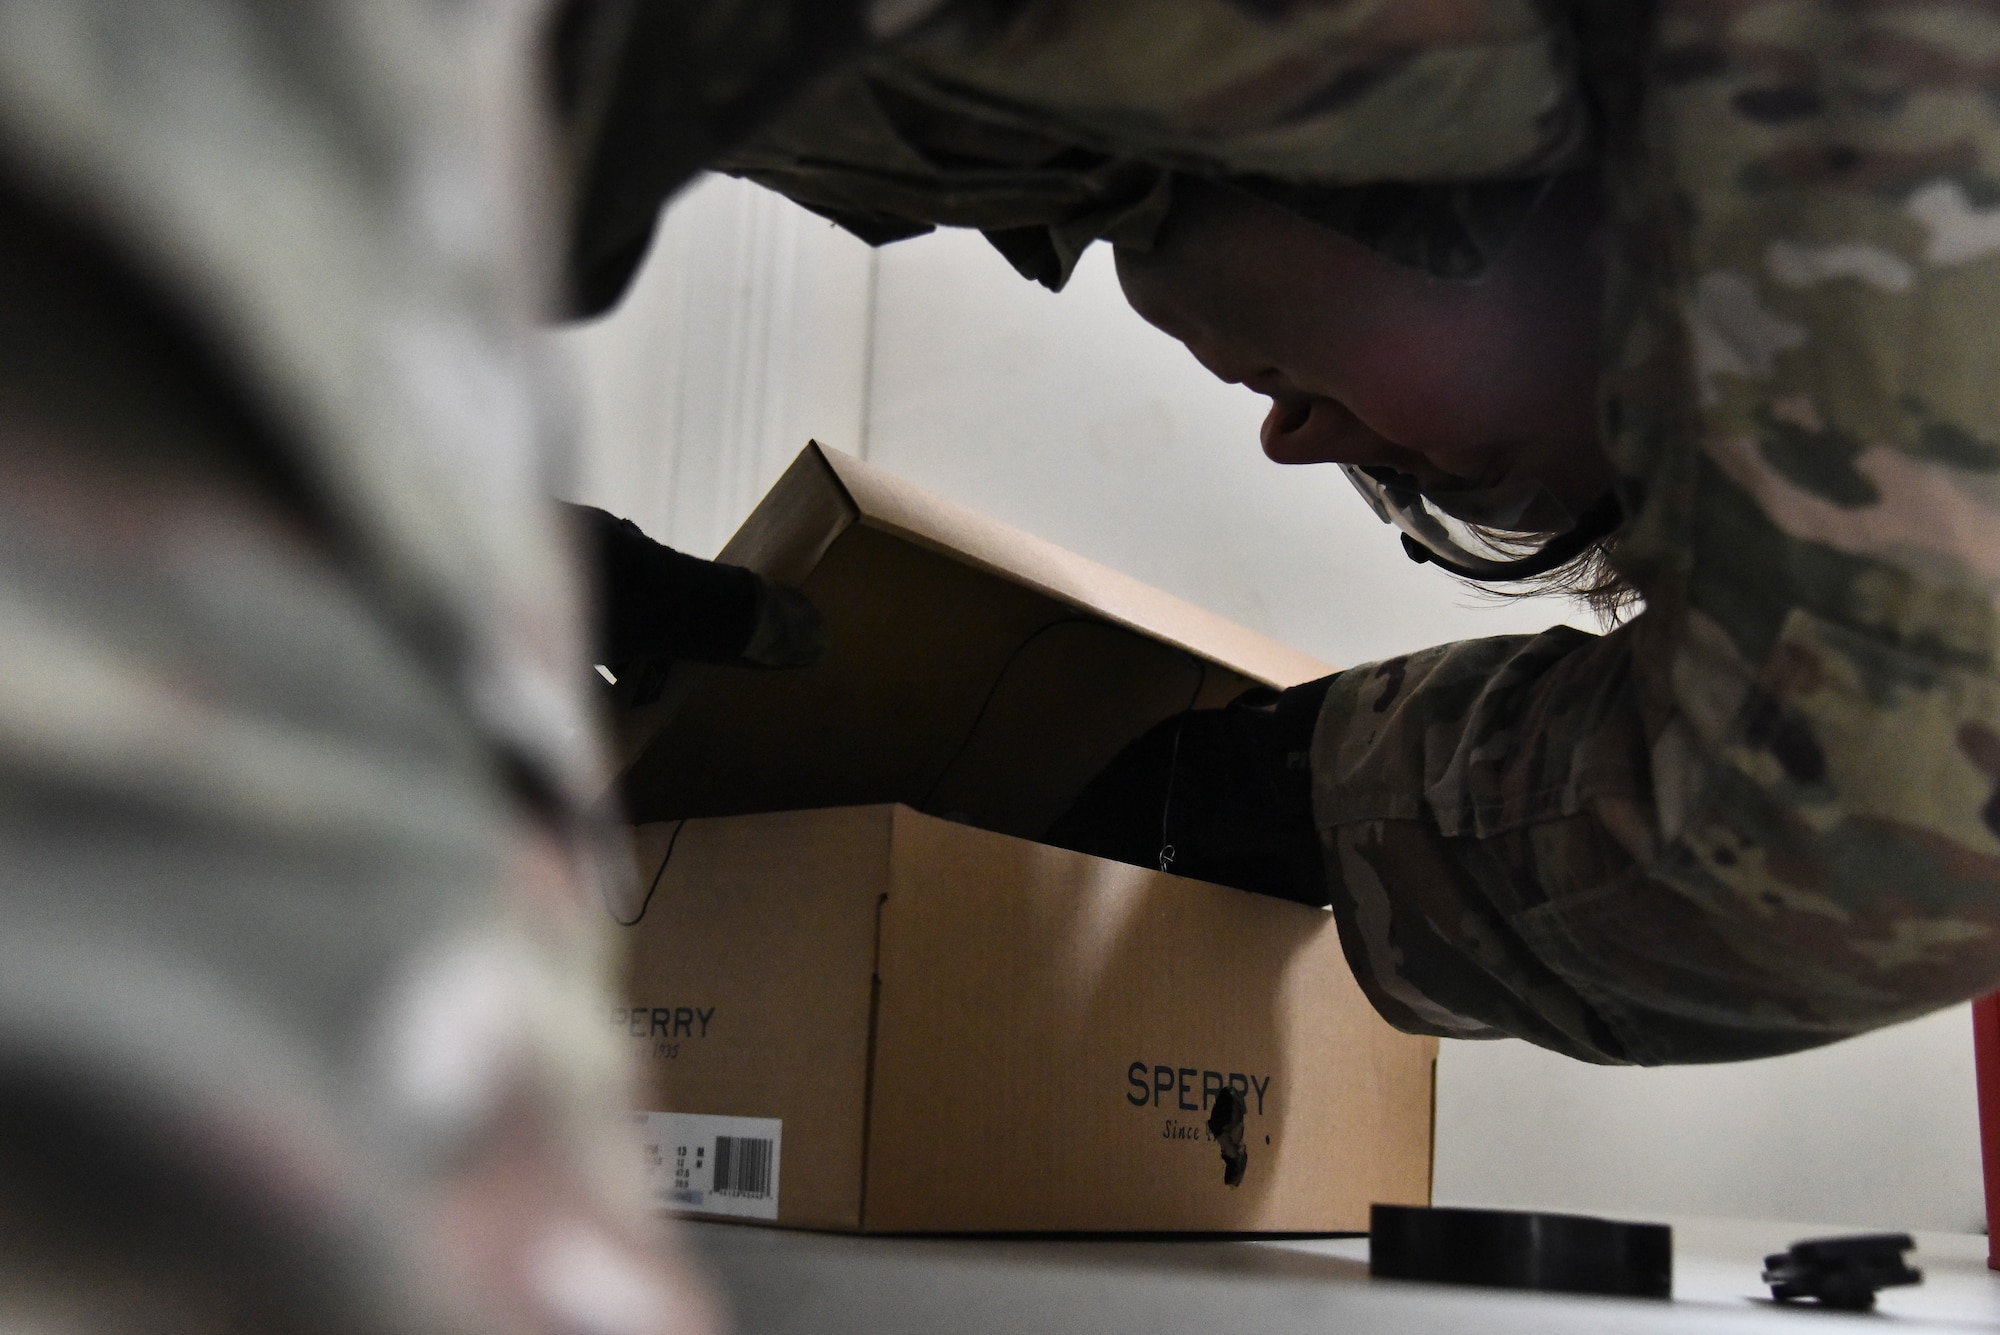 U.S. Air Force Staff Sgt. Mike Kealty, 380th Expeditionary Civil Engineer Squadron Explosive Ordnance Disposal flight EOD team member, insulates and isolates a blasting cap during proficiency training at Al Dhafra Air Base, United Arab Emirates, Feb. 12, 2019. EOD Airmen are trained to detect, disarm, detonate and dispose of explosive threats all over the world. (U.S. Air Force photo by Senior Airman Mya M. Crosby)